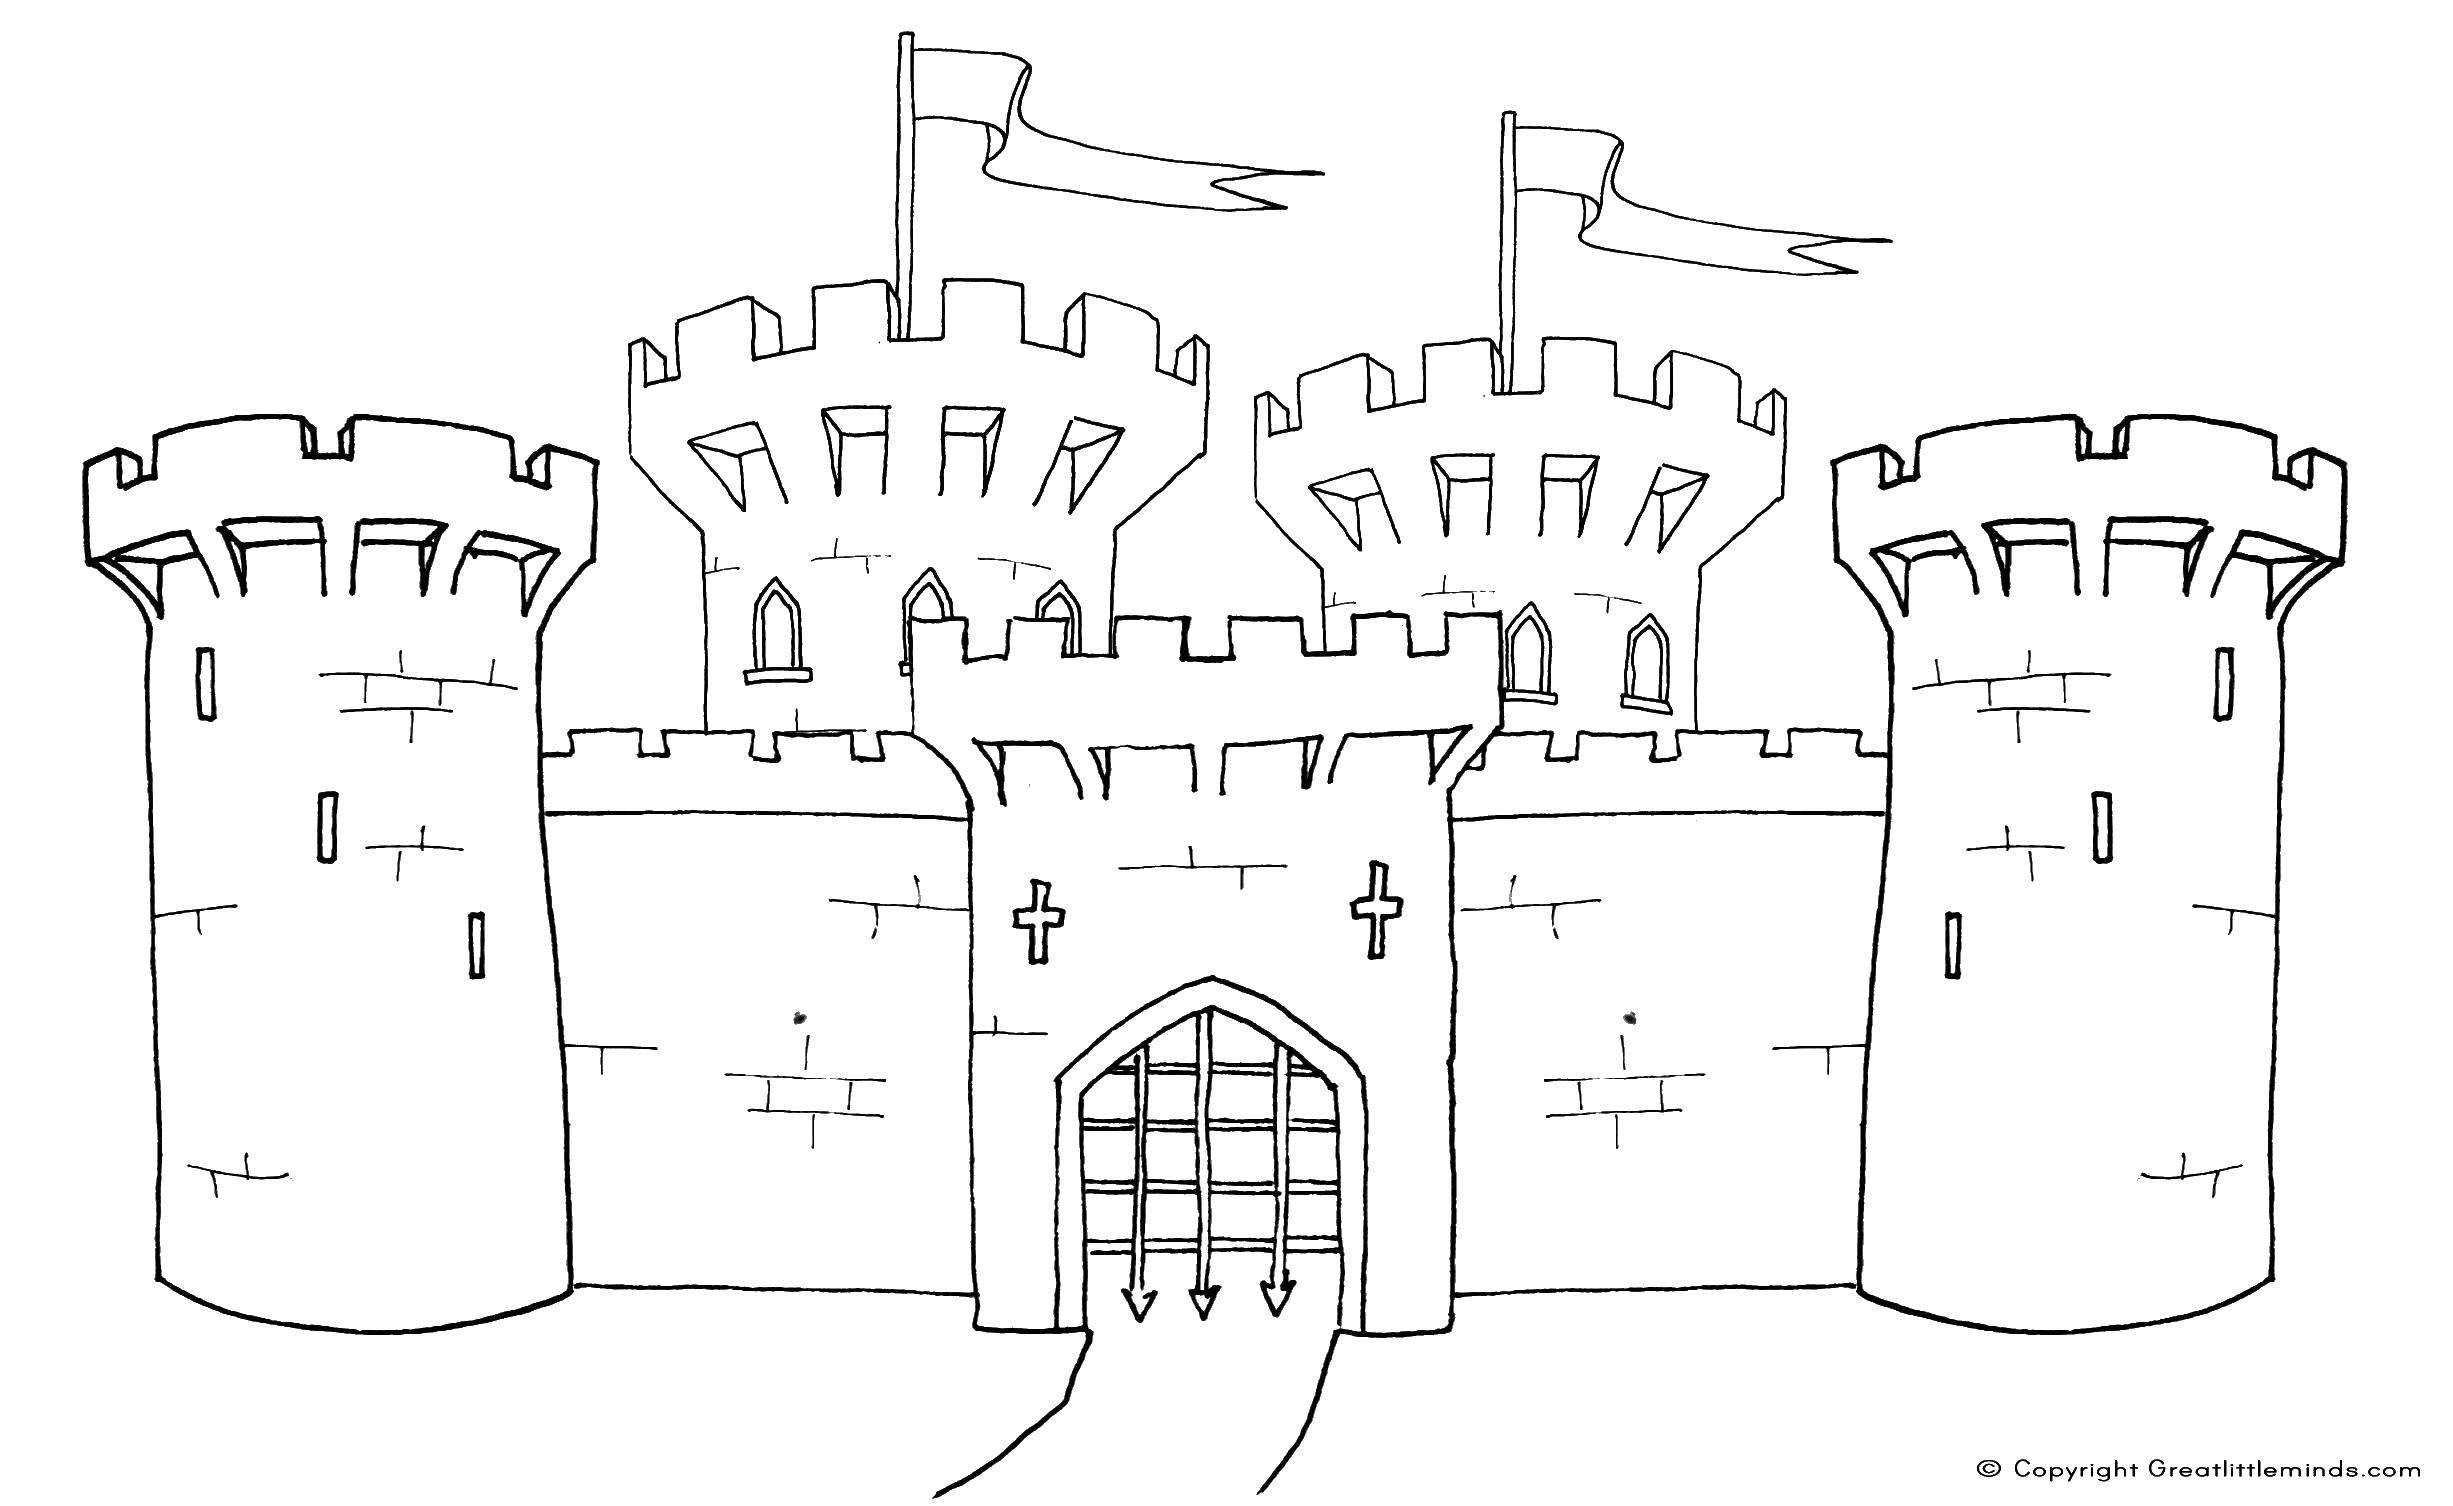 Coloring Castle with flags. Category Locks . Tags:  Zam.